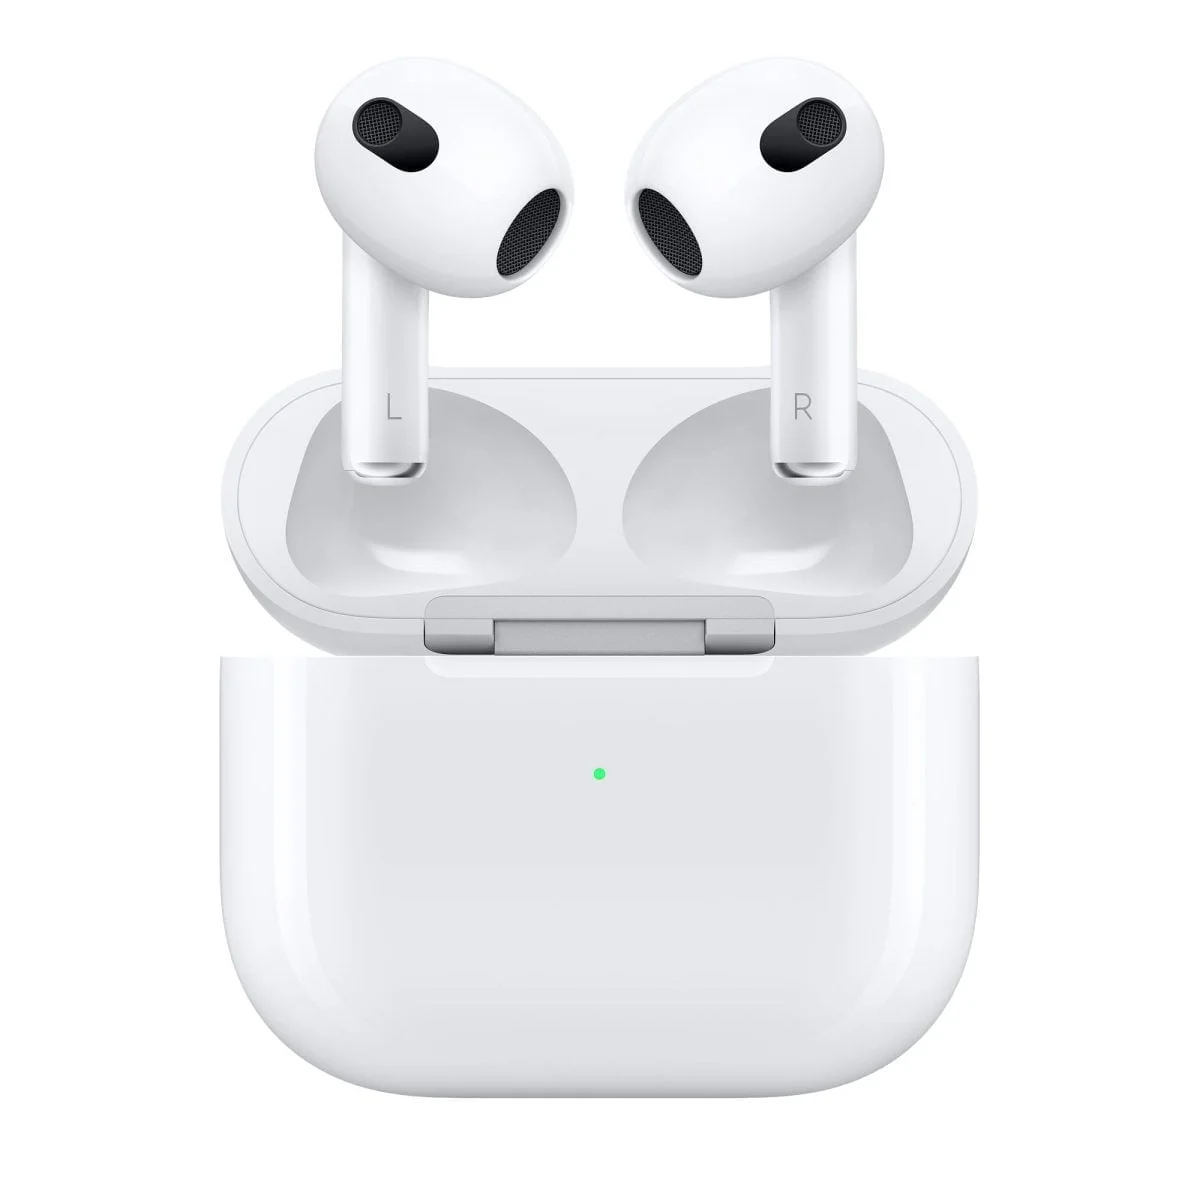 Mme73 Apple &Amp;Lt;H1&Amp;Gt;Apple Airpods (3Rd Generation) - White&Amp;Lt;/H1&Amp;Gt; &Amp;Lt;Div Class=&Amp;Quot;Rc-Pdsection-Mainpanel Column Large-9 Small-12&Amp;Quot;&Amp;Gt; &Amp;Lt;H2 Class=&Amp;Quot;H4-Para-Title&Amp;Quot;&Amp;Gt;All-New Design&Amp;Lt;/H2&Amp;Gt; &Amp;Lt;Div Class=&Amp;Quot;Para-List As-Pdp-Lastparalist&Amp;Quot;&Amp;Gt; Airpods Are Lightweight And Offer A Contoured Design. They Sit At Just The Right Angle For Comfort And To Better Direct Audio To Your Ear. The Stem Is 33 Percent Shorter Than Airpods (2Nd Generation) And Includes A Force Sensor To Easily Control Music And Calls. &Amp;Lt;/Div&Amp;Gt; &Amp;Lt;/Div&Amp;Gt; Apple Airpods Apple Airpods (3Rd Generation) - White (Mme73)